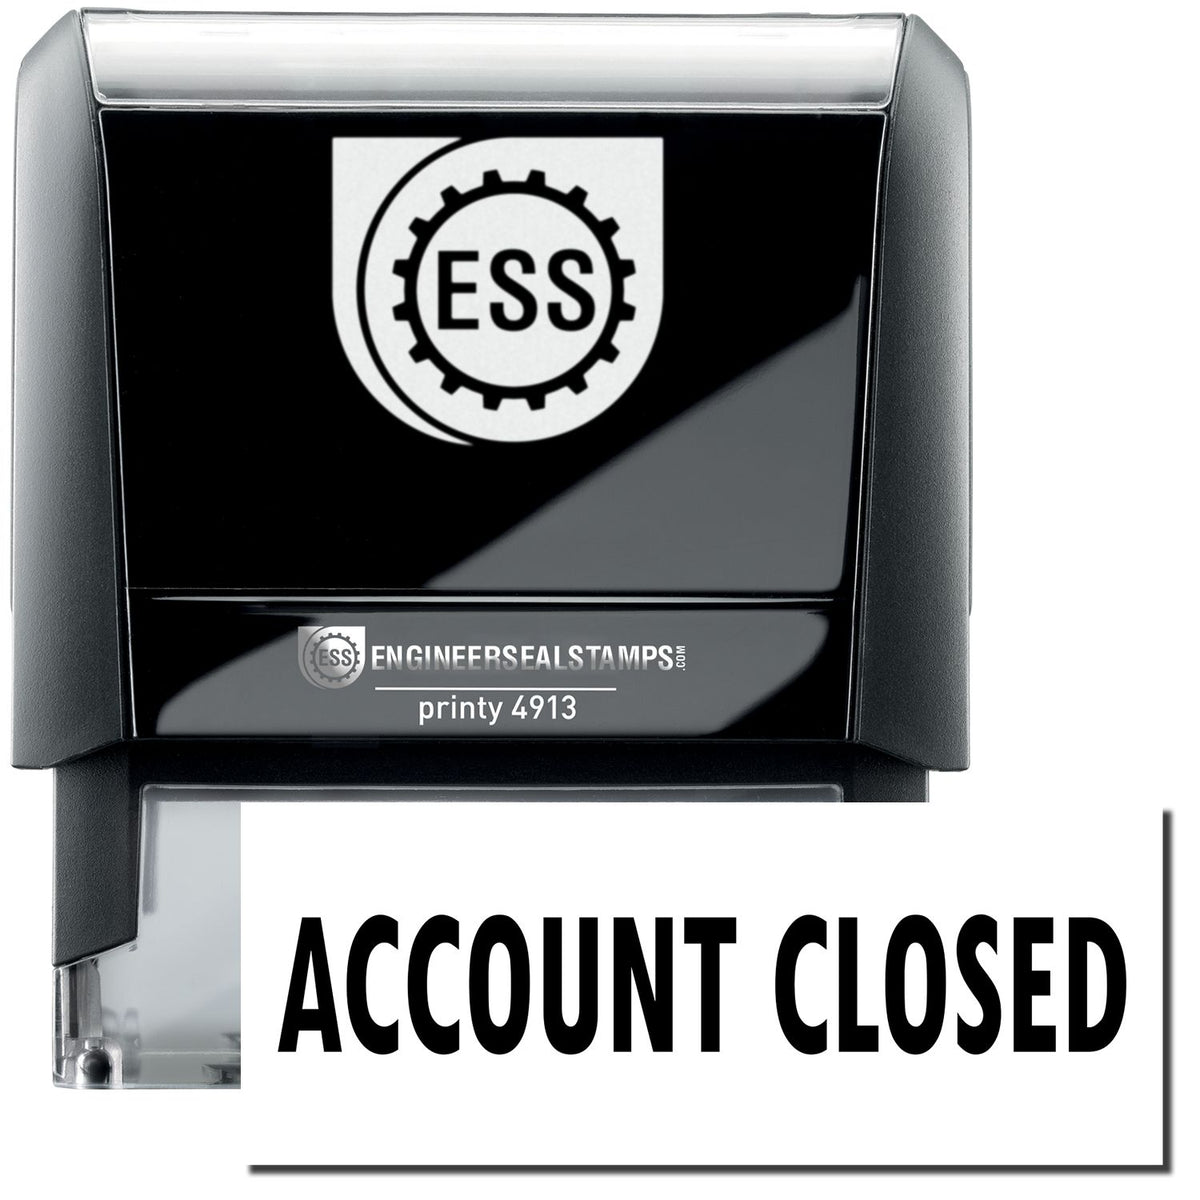 Large Self-Inking Account Closed Stamp showing how &quot;ACCOUNT CLOSED&quot; message (in large font) display by this self-inking stamp